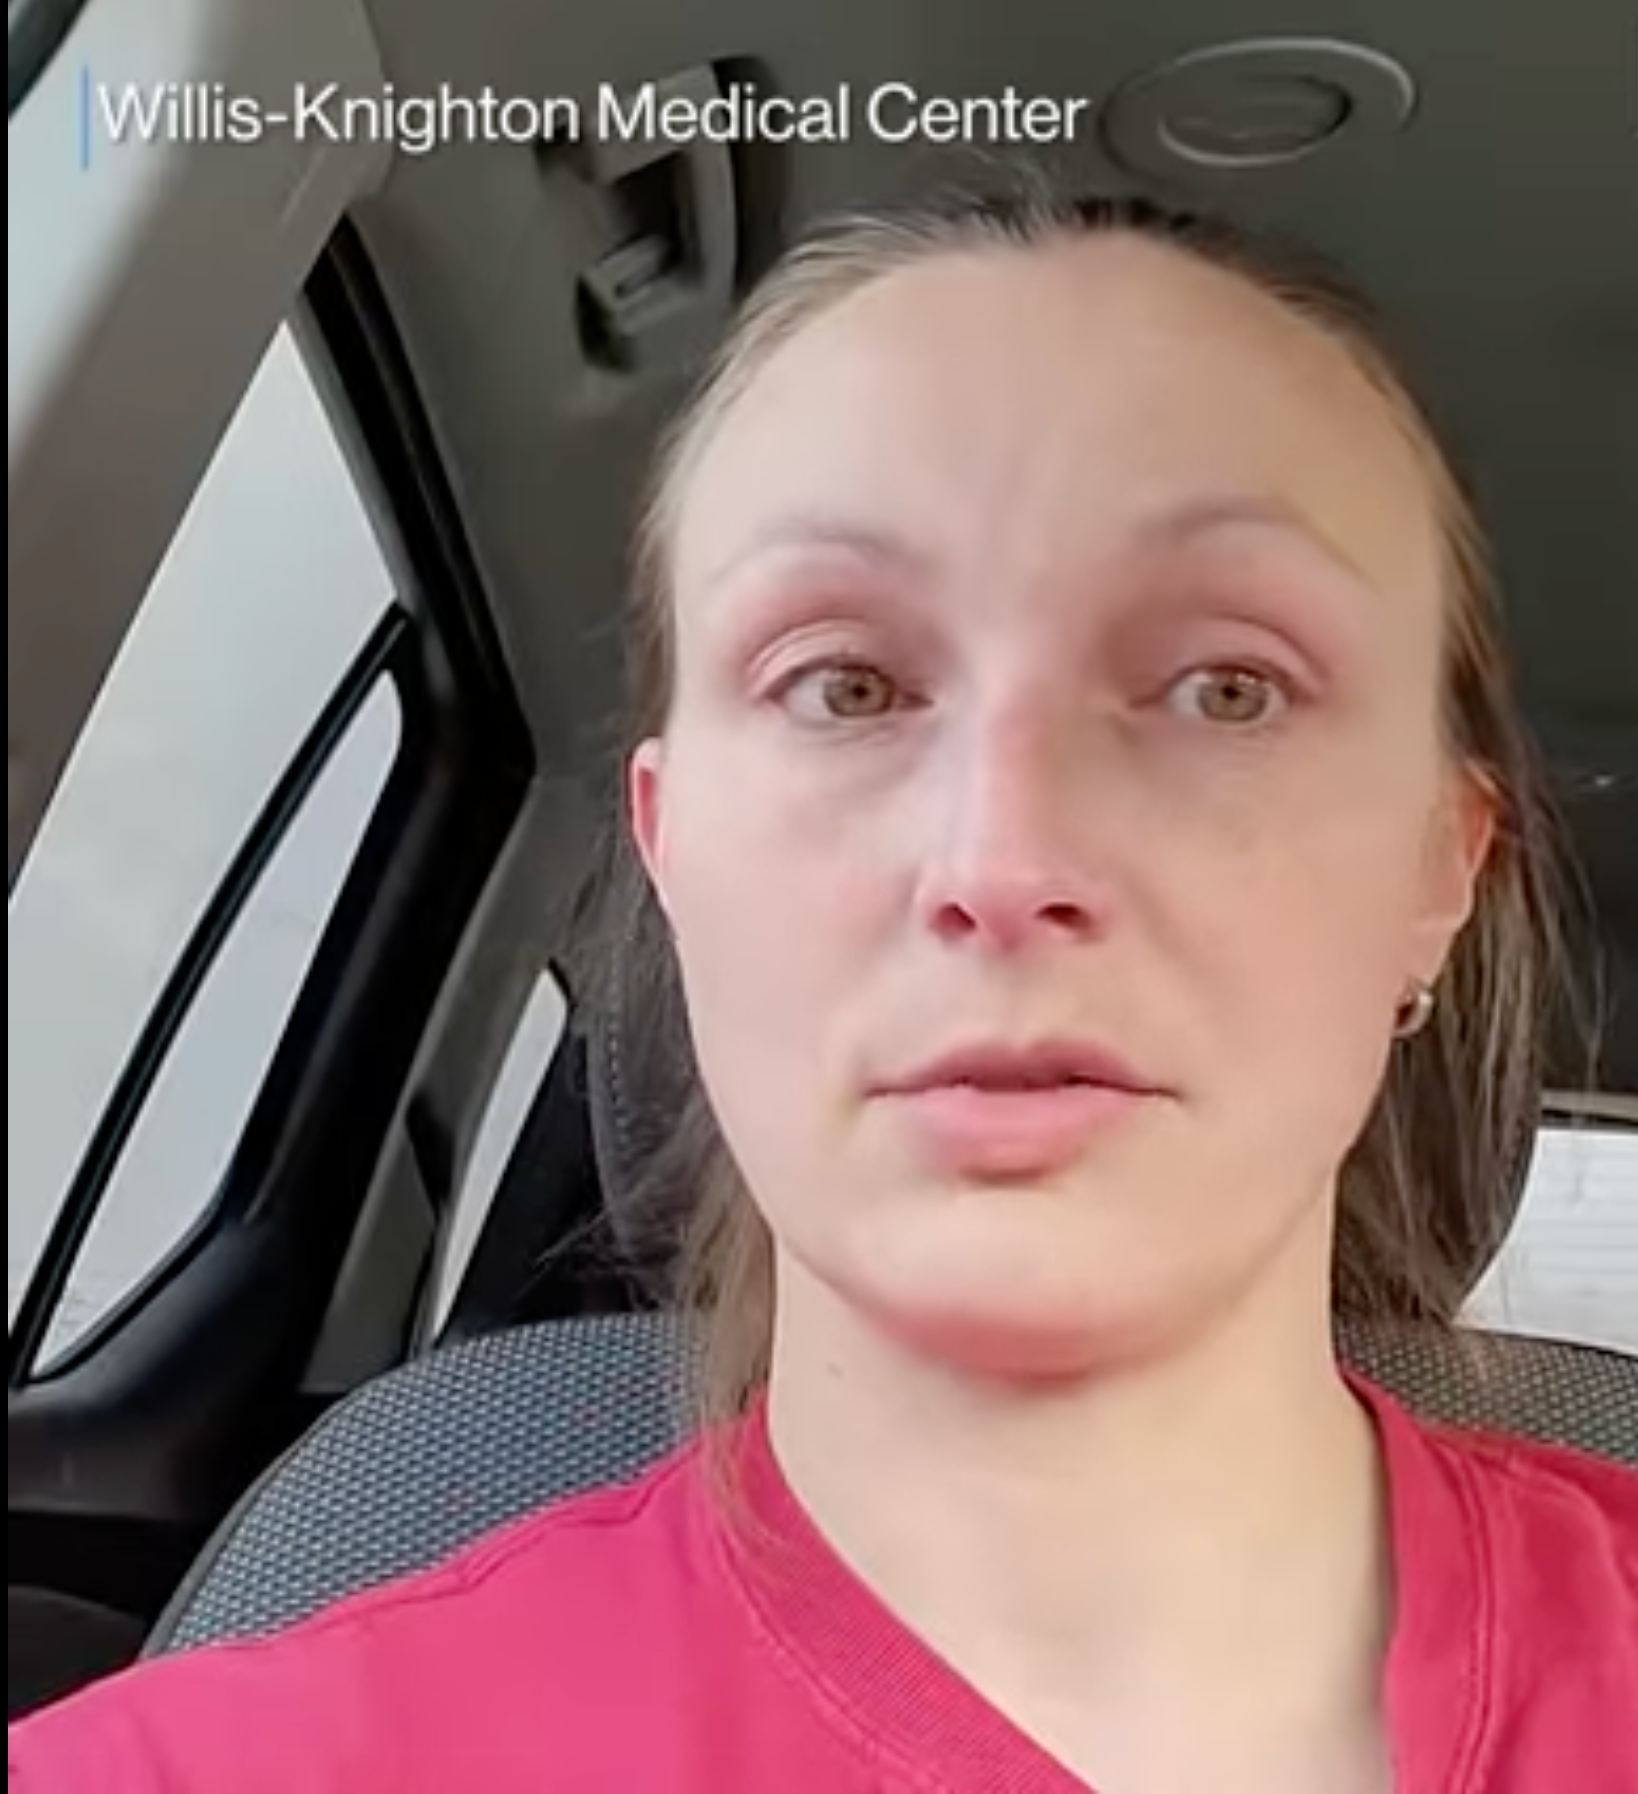 Felicia Croft shared a emotional video on social media explaining the dangers of the Delta variant of Covid-19 and urged people to get vaccinated.